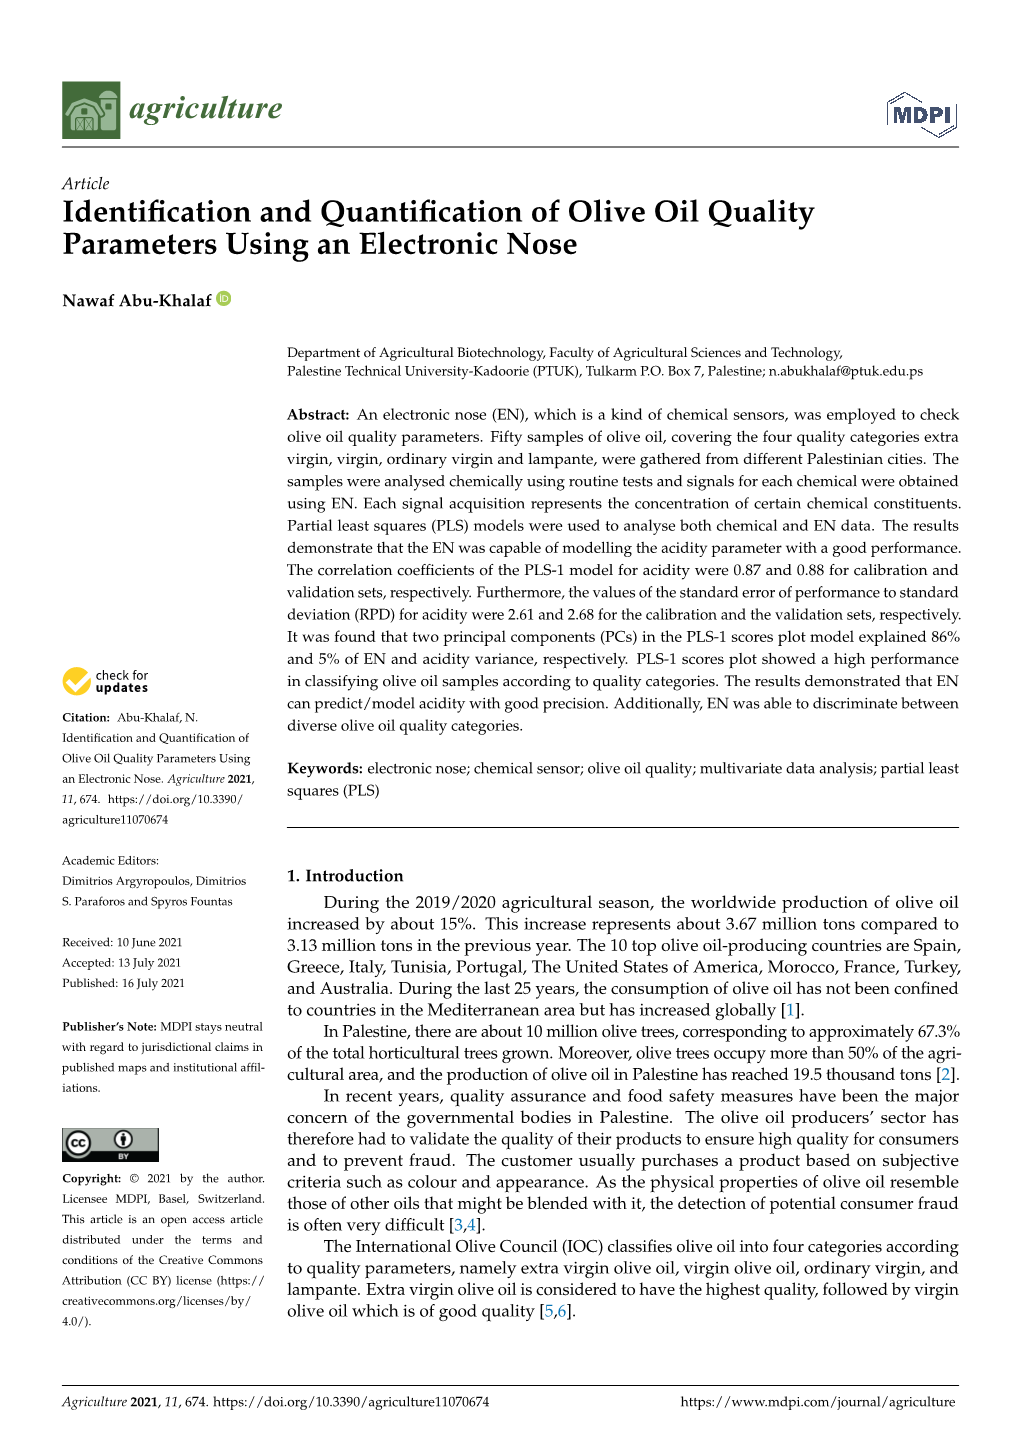 Identification and Quantification of Olive Oil Quality Parameters Using